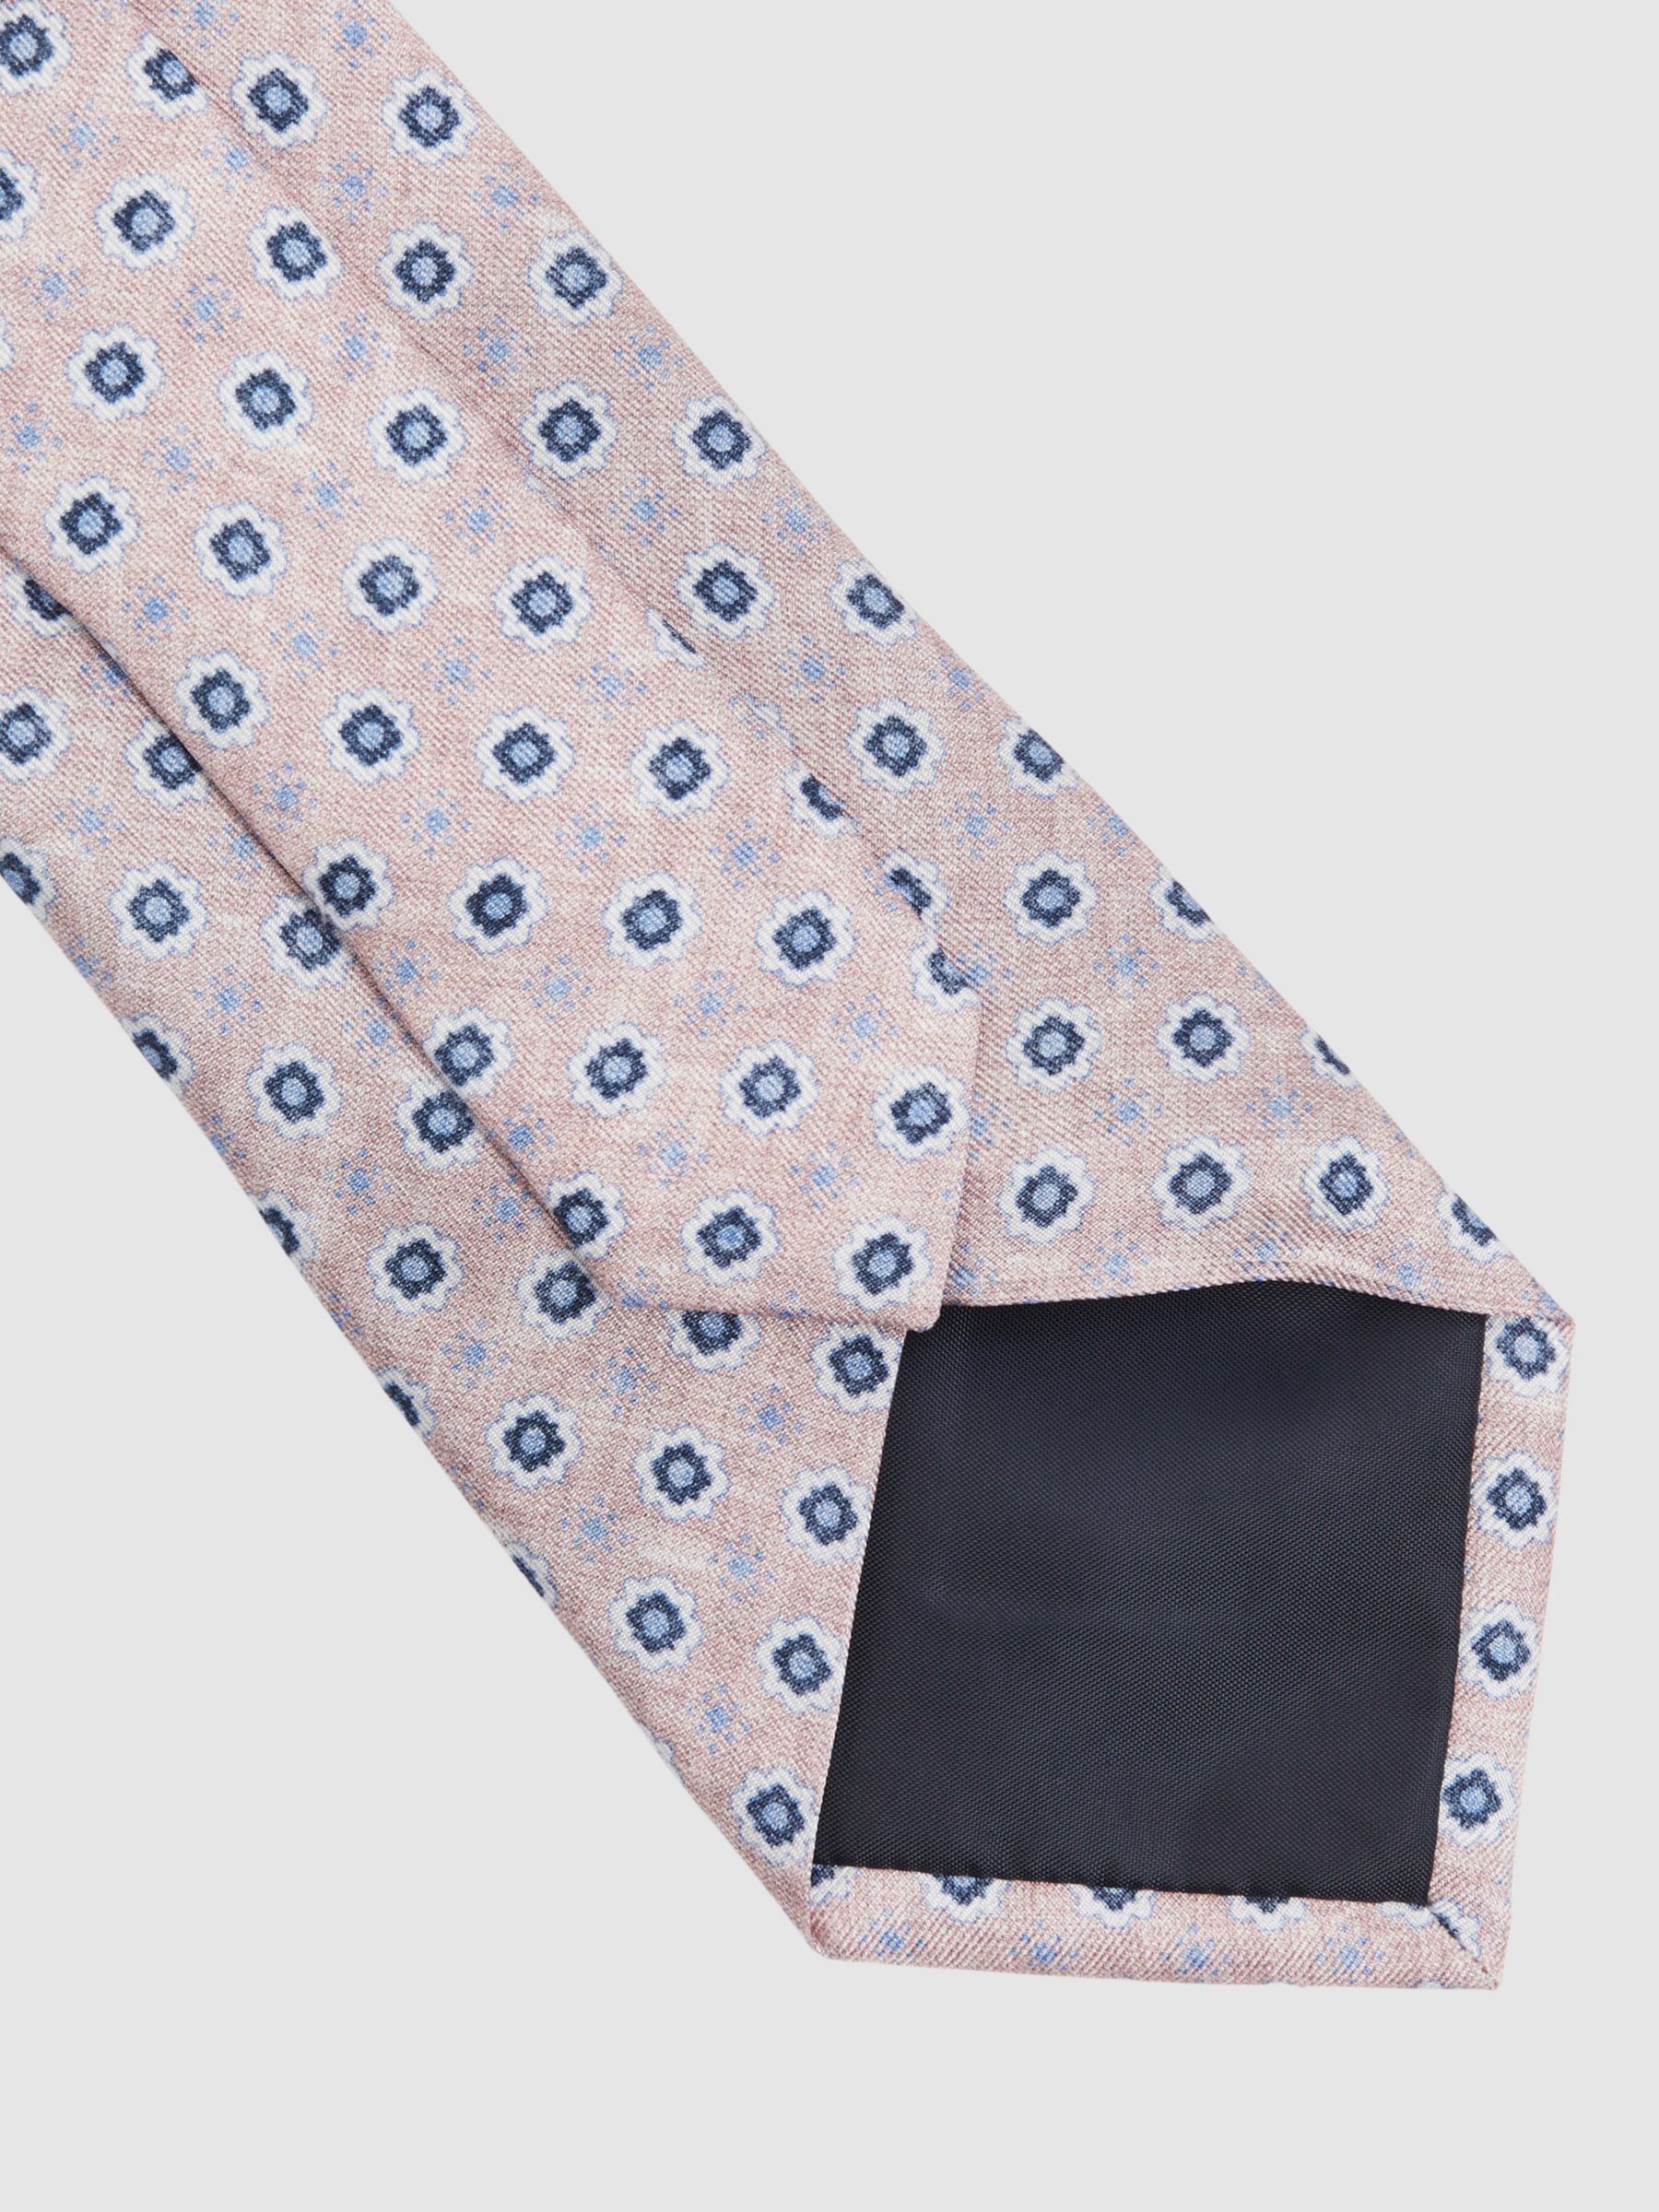 Reiss Basilica Small Floral Print Silk Tie, Soft Rose, One Size